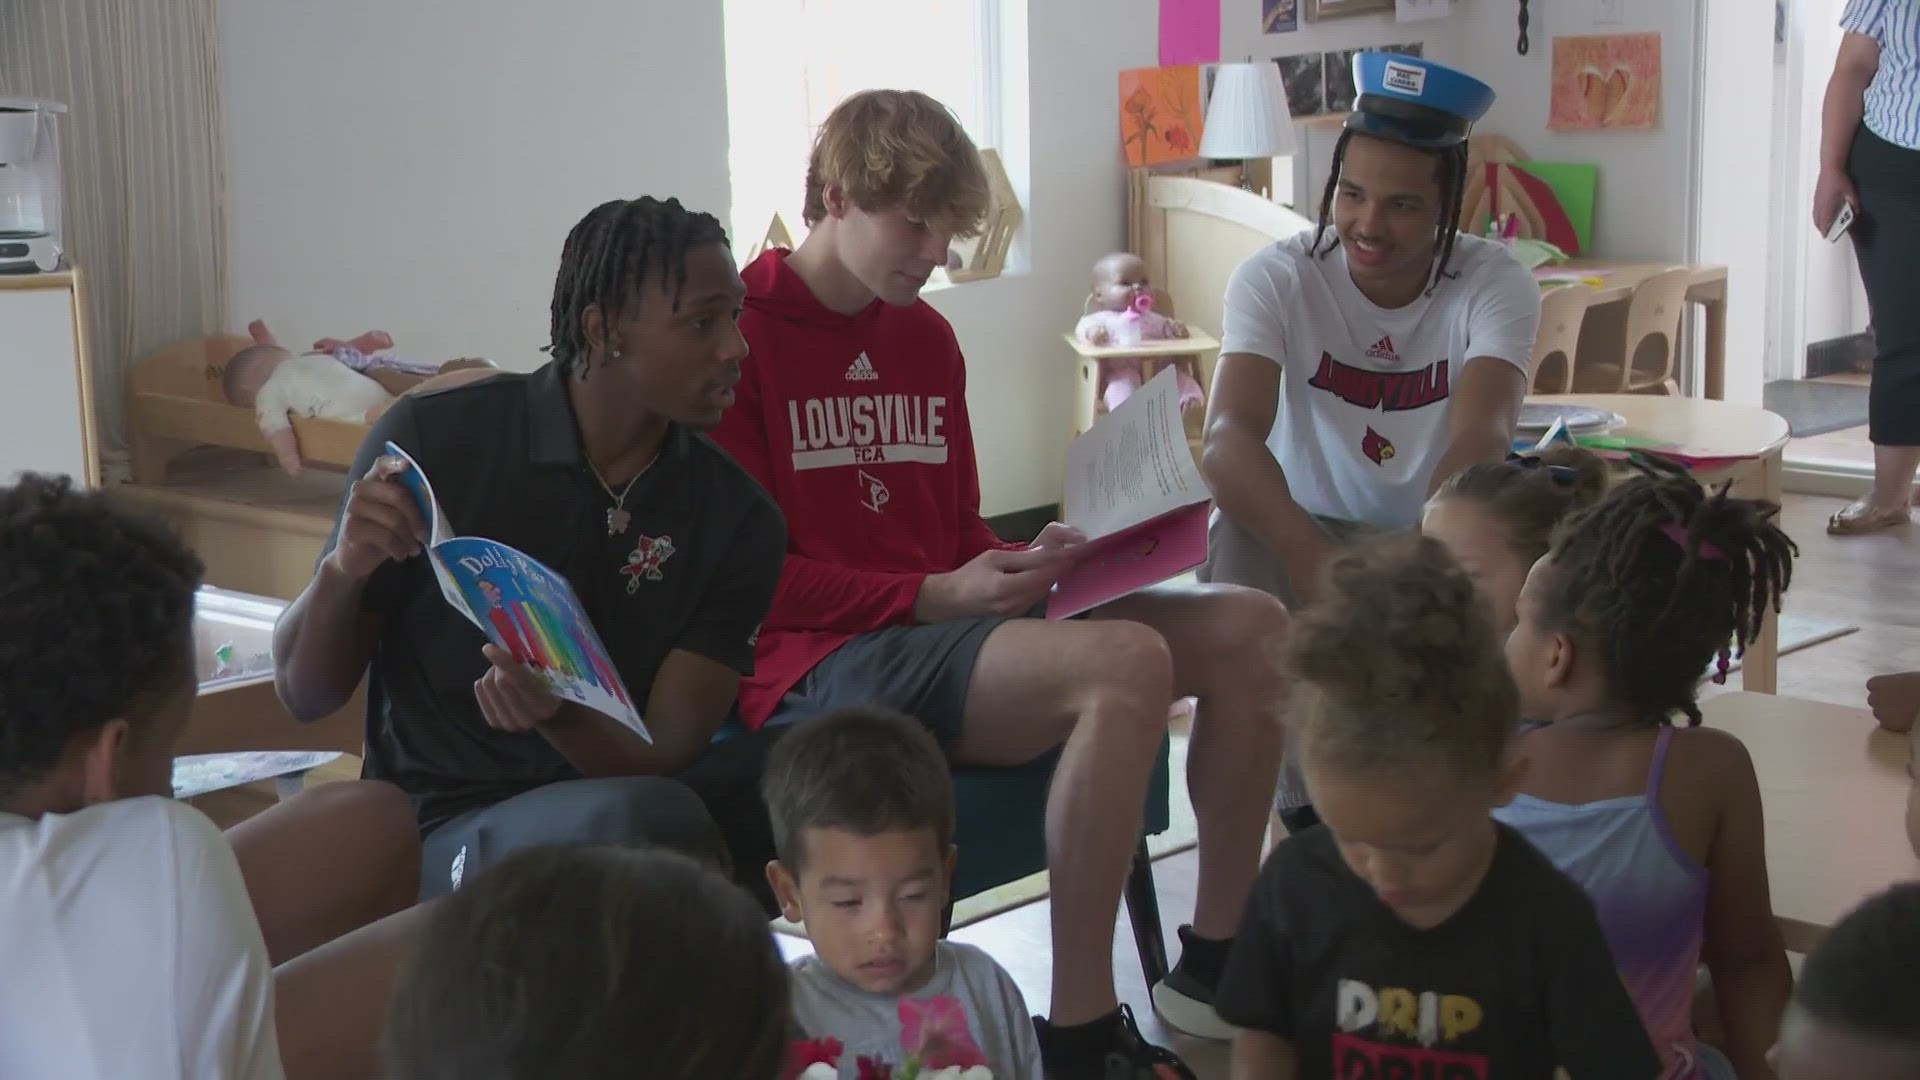 University of Louisville basketball players read books to children